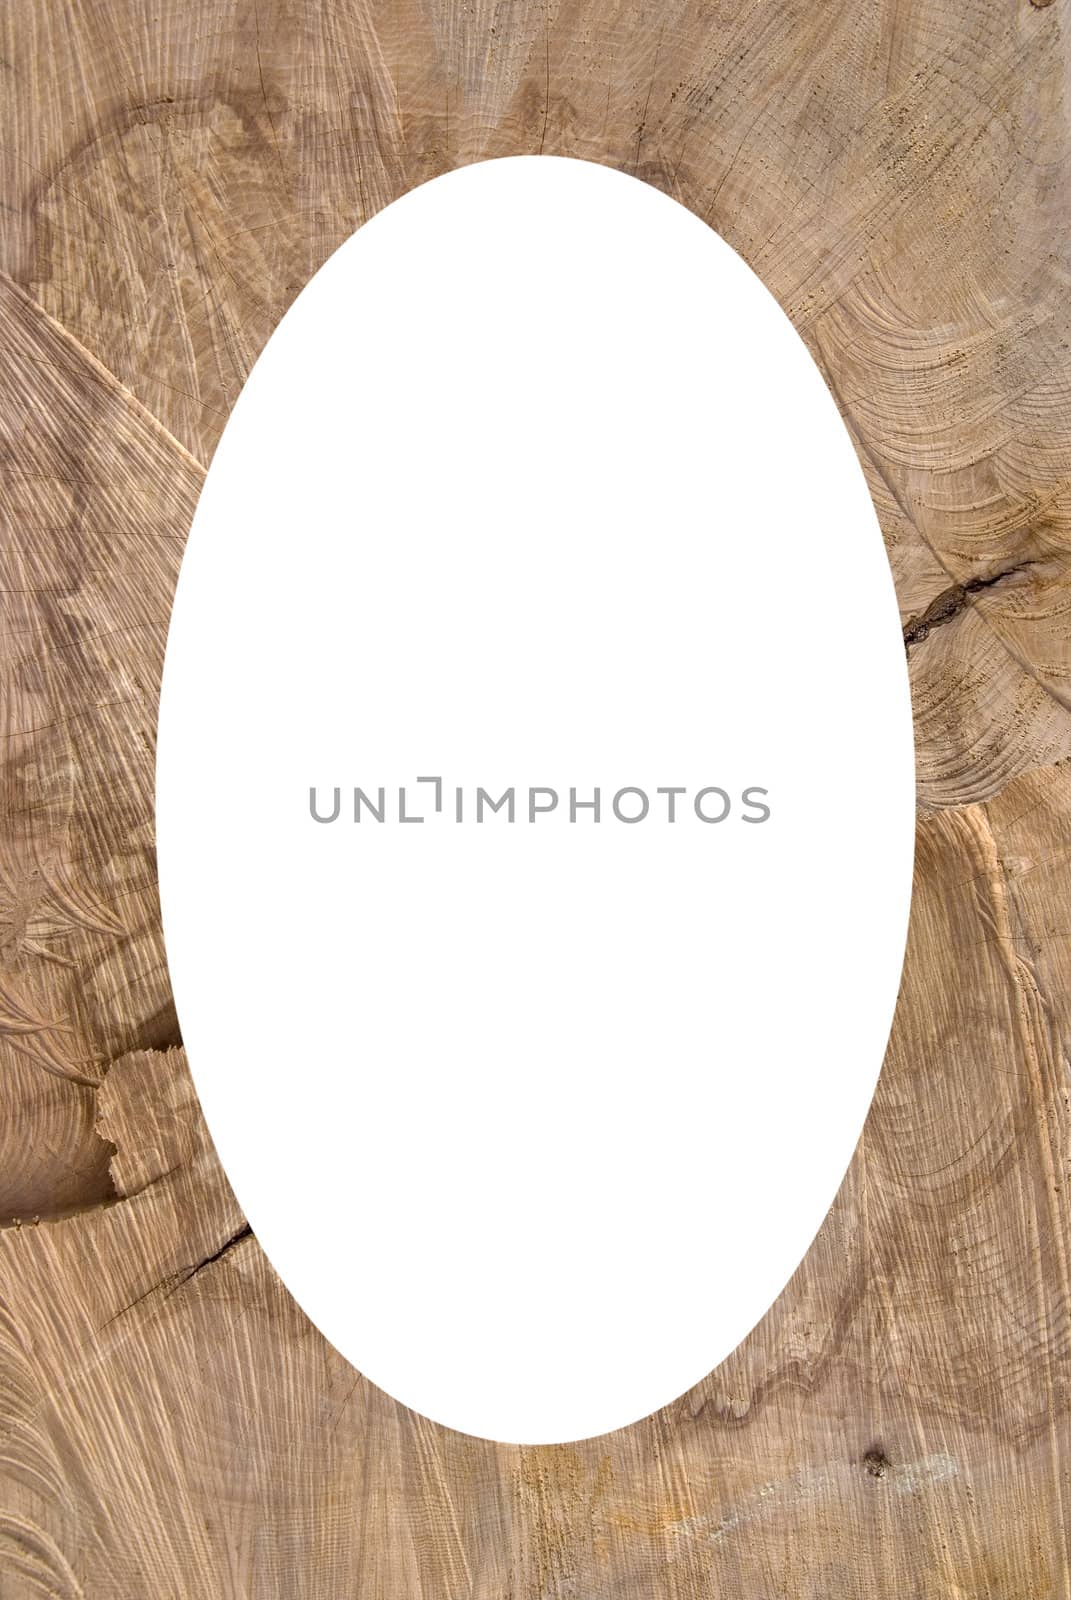 Background of truncated wood trunk section texture. Isolated white oval place for text photograph image in center of frame.